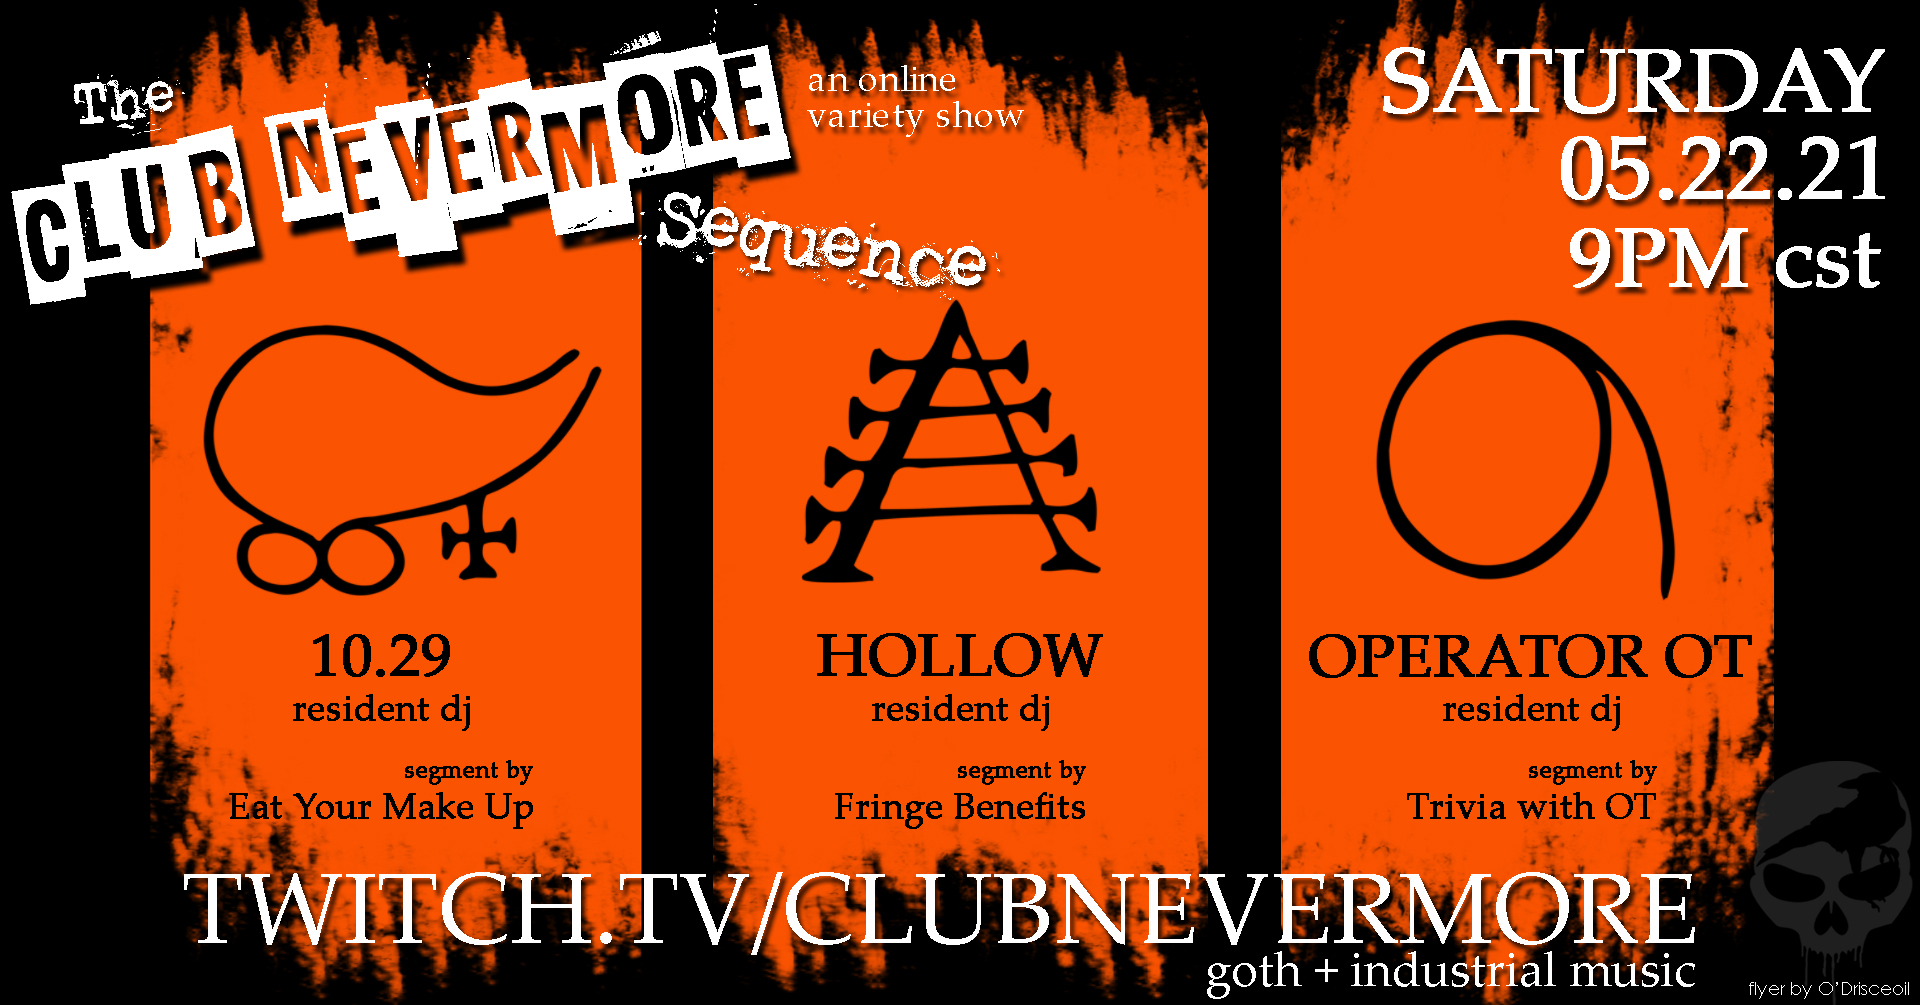 Flyer for the Club Nevermore Sequence, May 2021 Part 2. It&rsquo;s a black background with three orange boxes, each with the alchemical symbols for receiver, amalgam, and retort. This event will be at 9 PM Central Time on May 22, 2021 on Club Nevermore&rsquo;s Twitch channel at twitch.tv/clubnevermore.